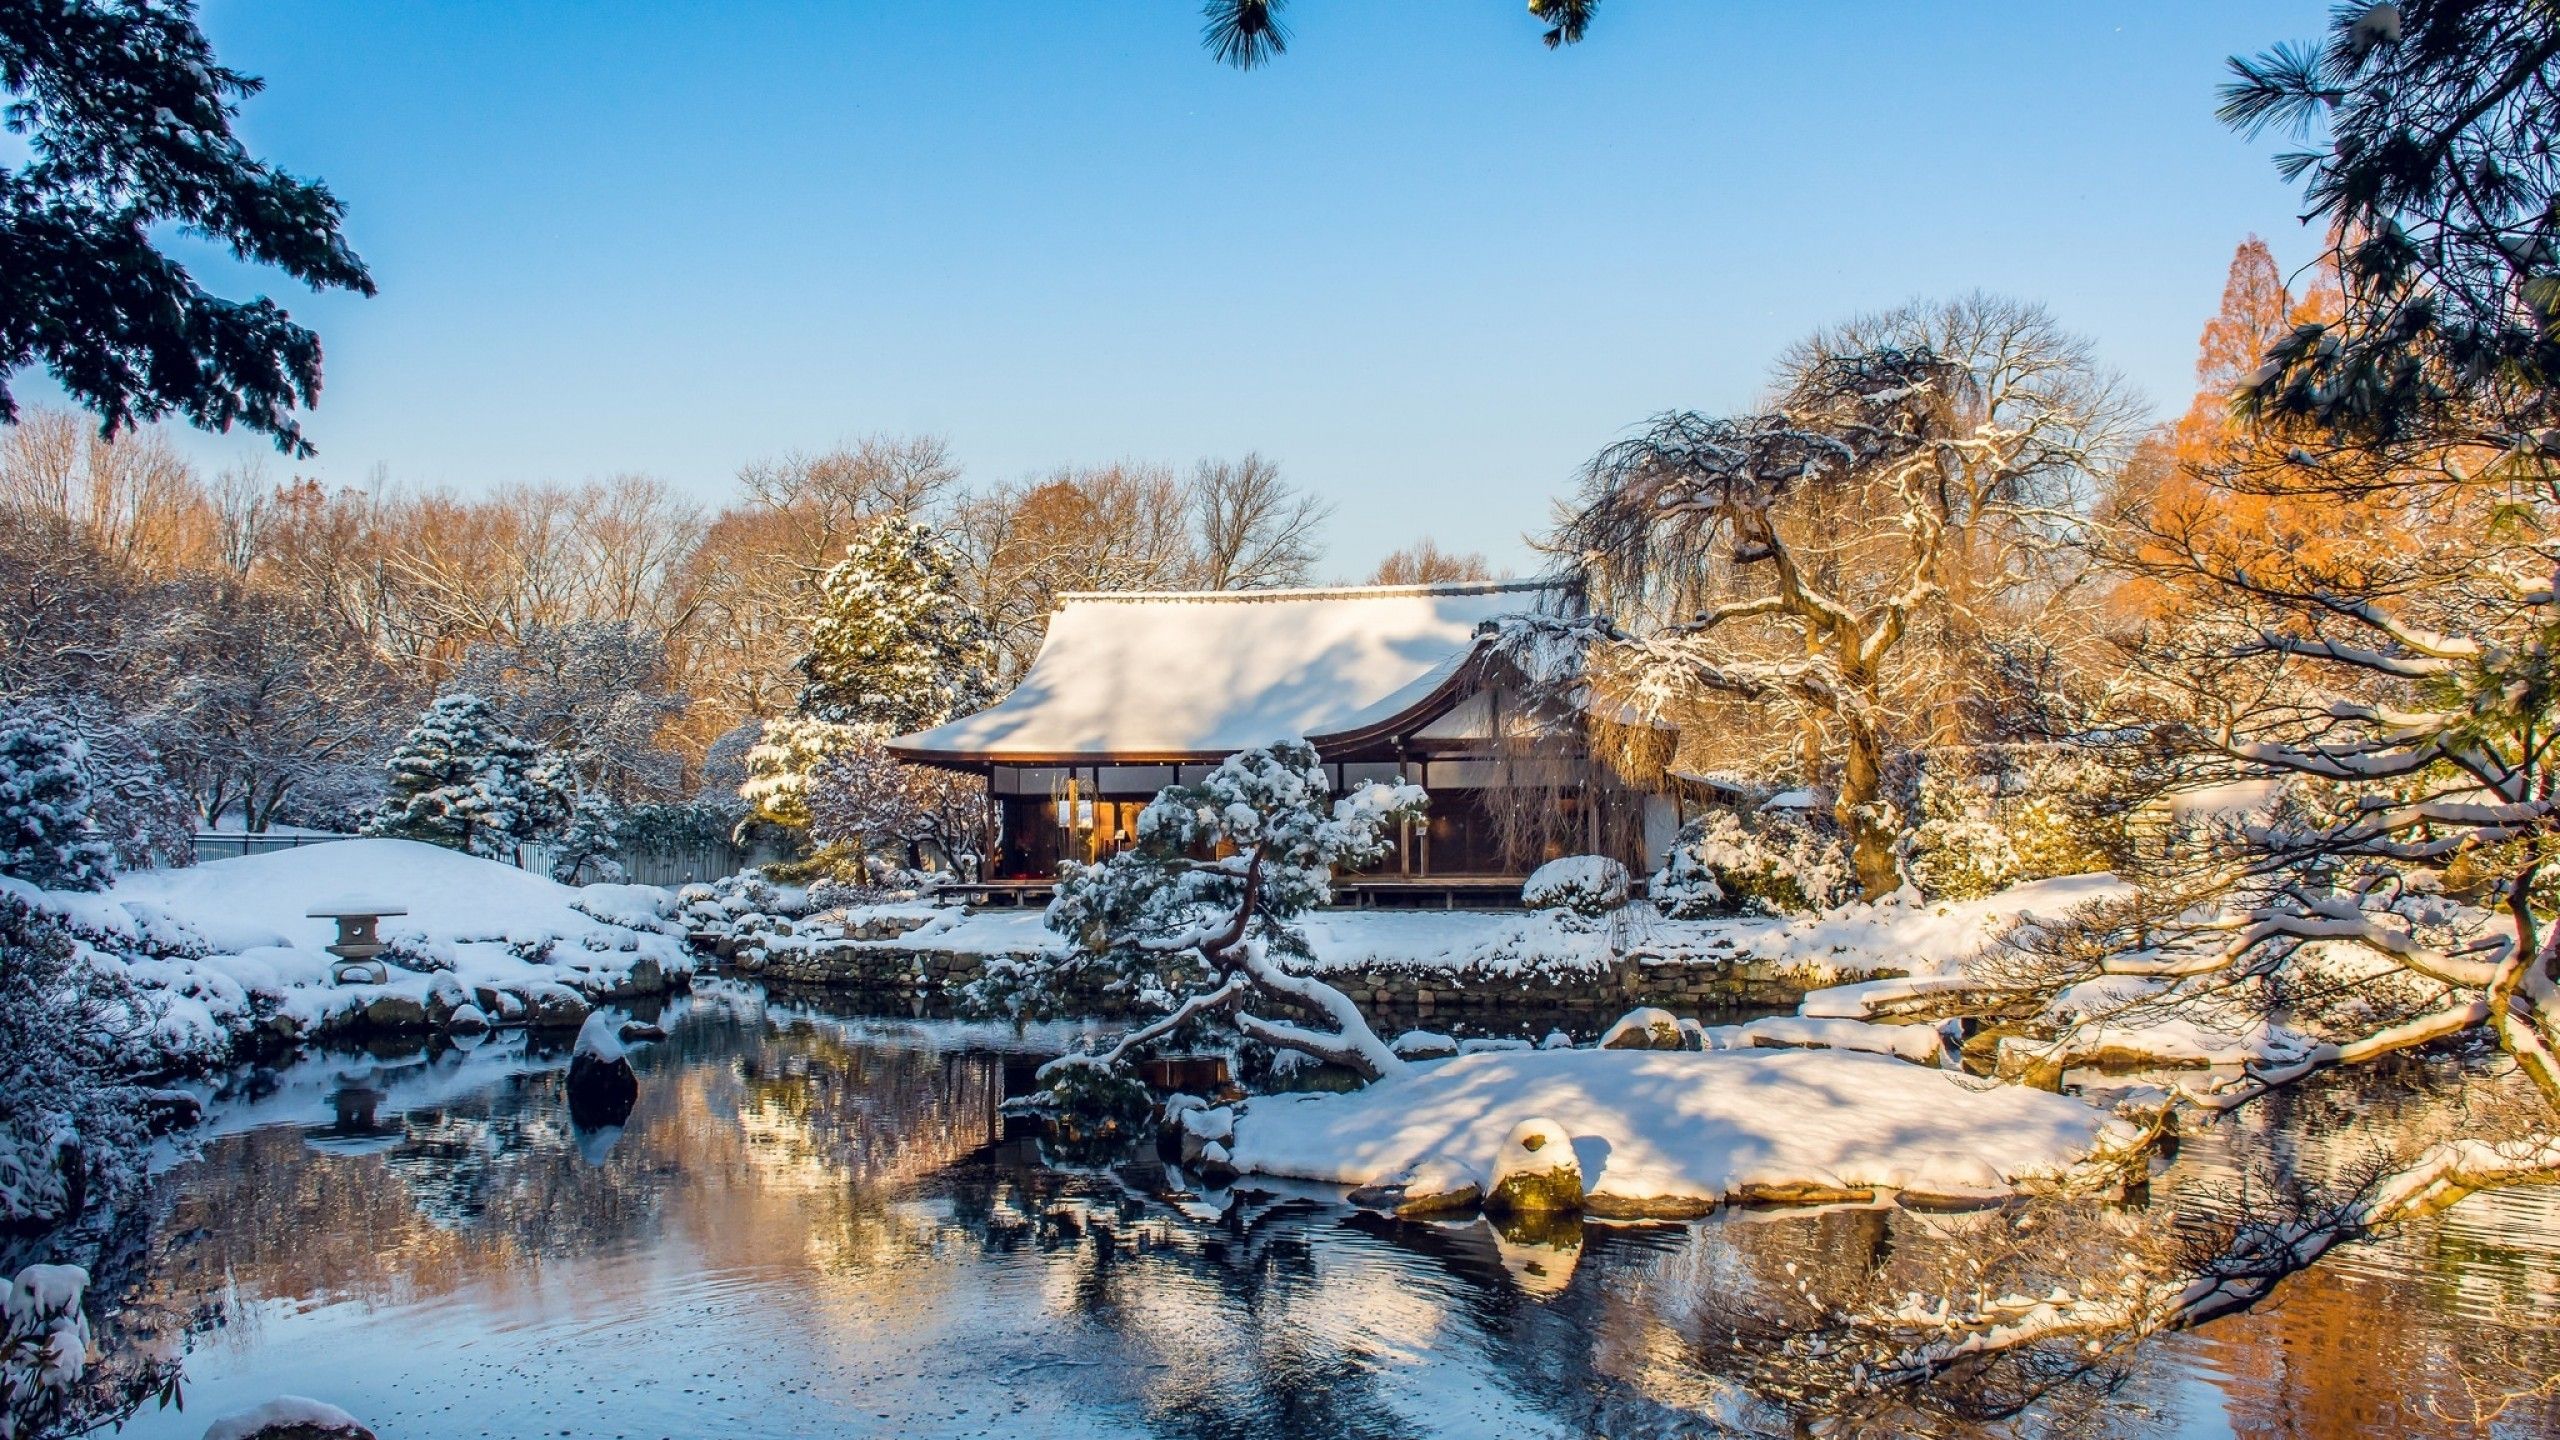 Download 2560x1440 Japan, House, Snow, Reflection, Water, Trees, Winter Wallpaper for iMac 27 inch